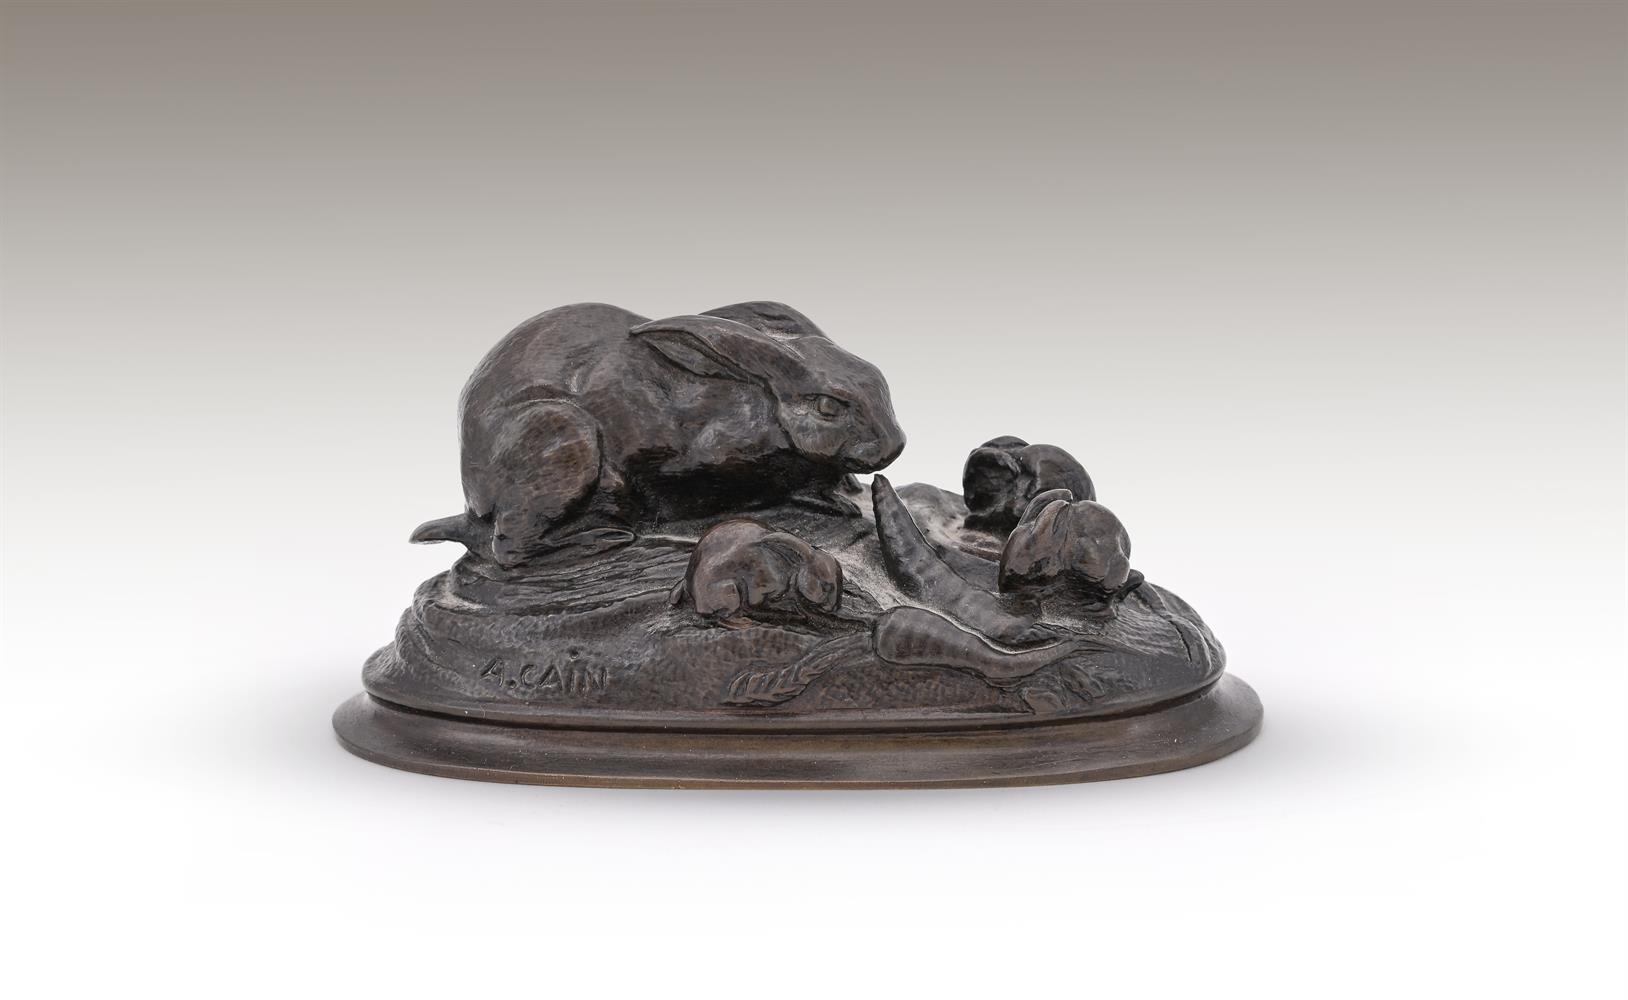 AUGUSTE CAIN (FRENCH, 1821-1894), A BRONZE MODEL OF RABBIT WITH YOUNG - Image 5 of 5